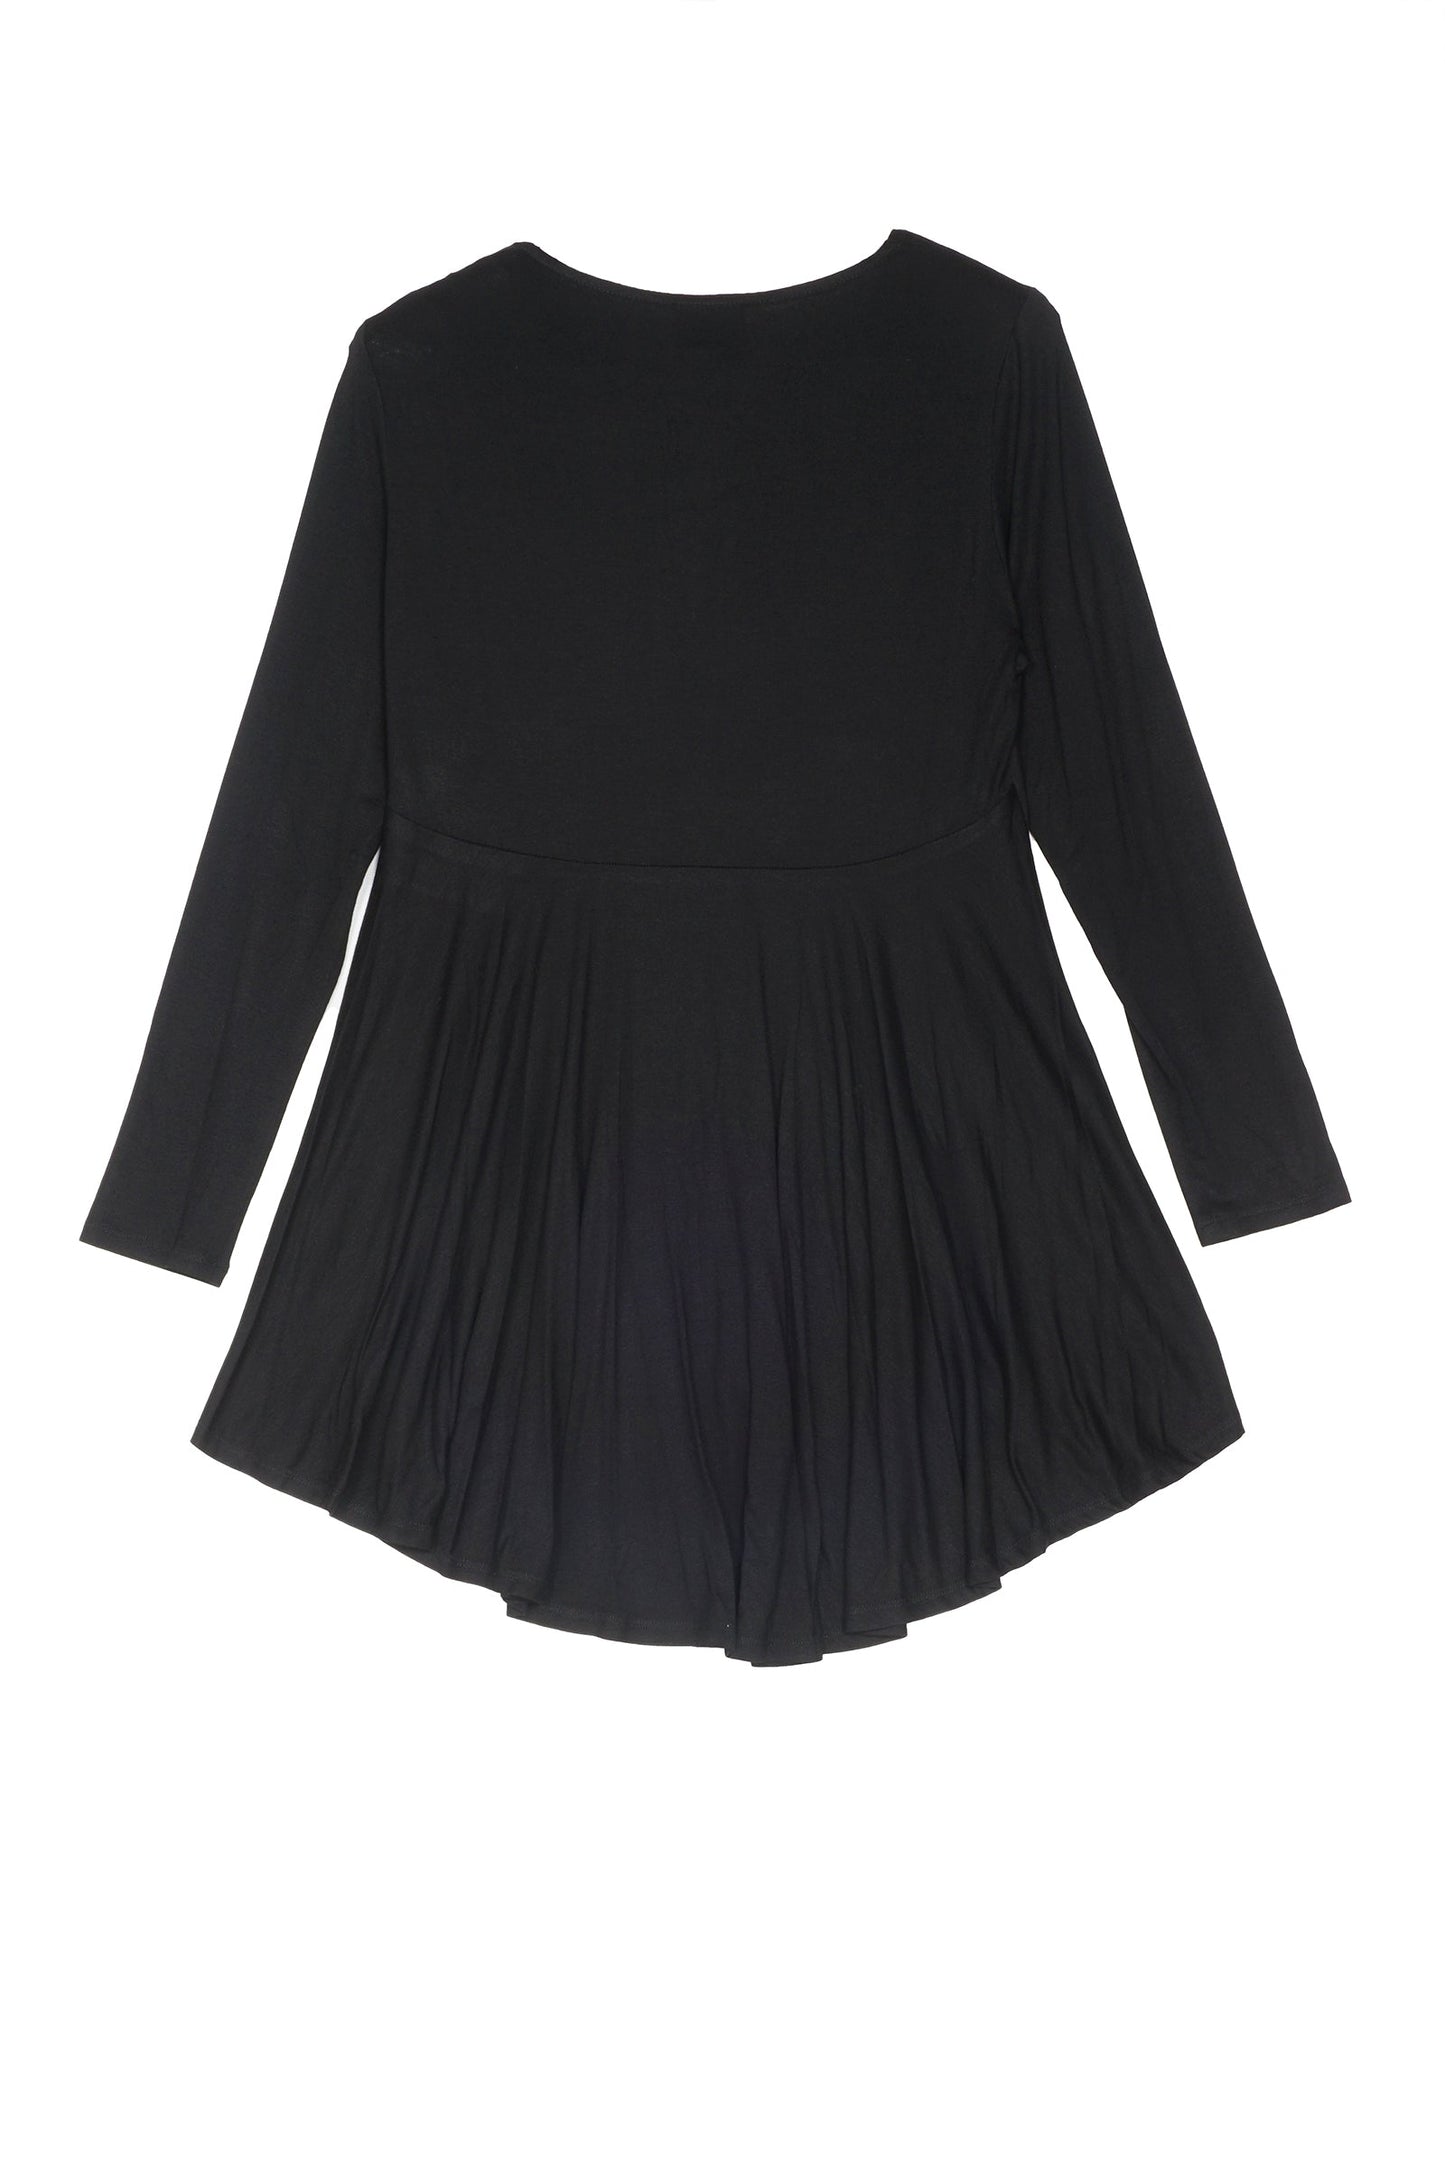 RAYON JERSEY R/S BACK FLARE TUNIC - rj1535-blk -